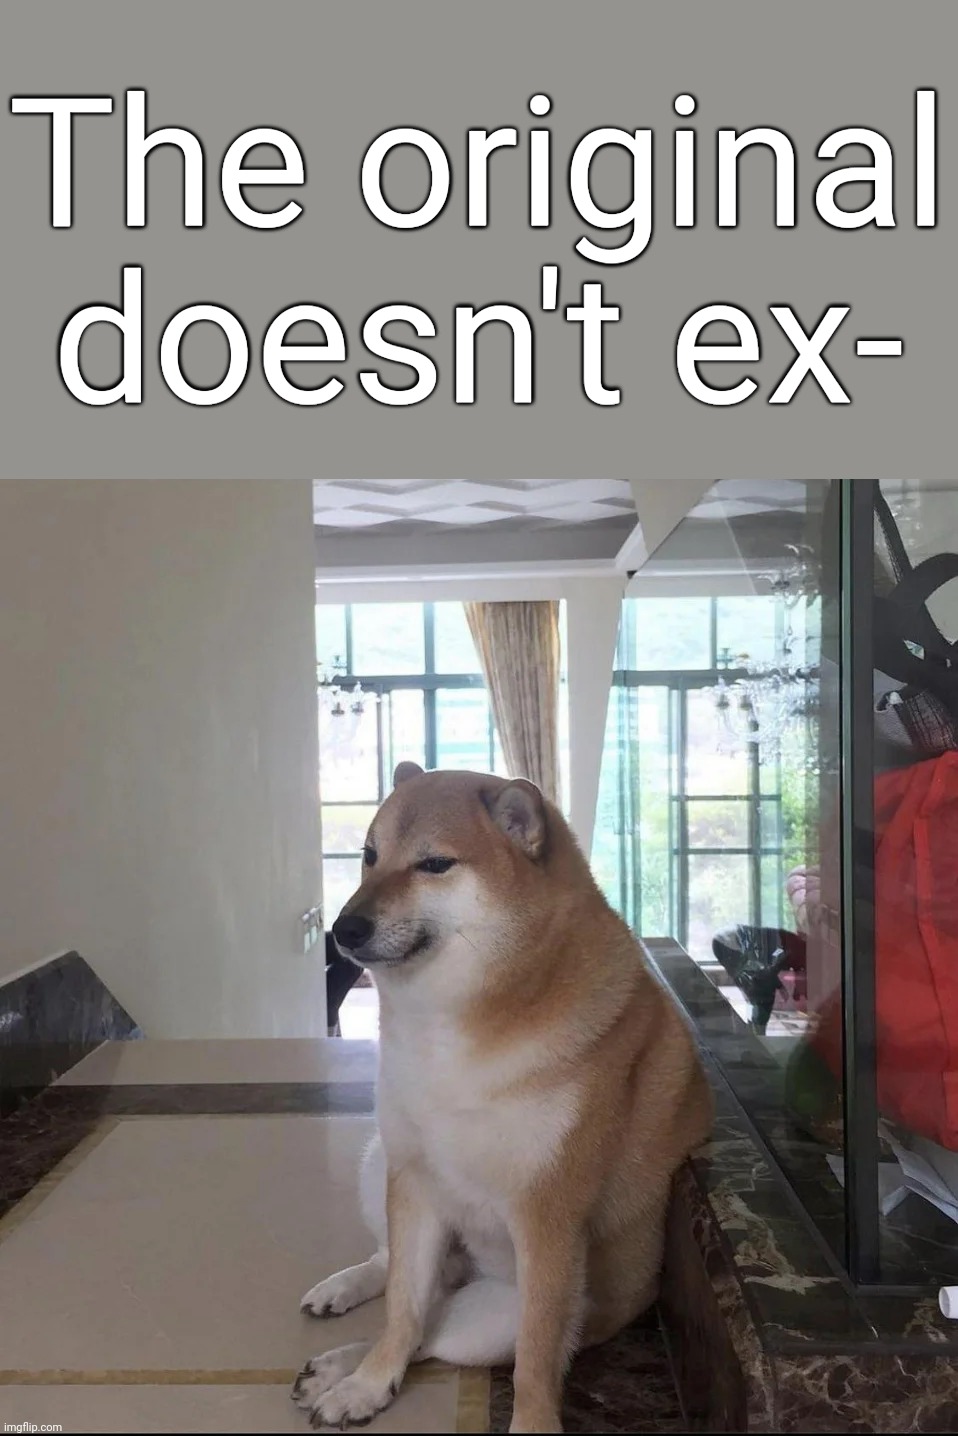 The Original Cheems | The original doesn't ex- | image tagged in photoshop,original meme,cheems,memes,funny,buff doge vs cheems | made w/ Imgflip meme maker